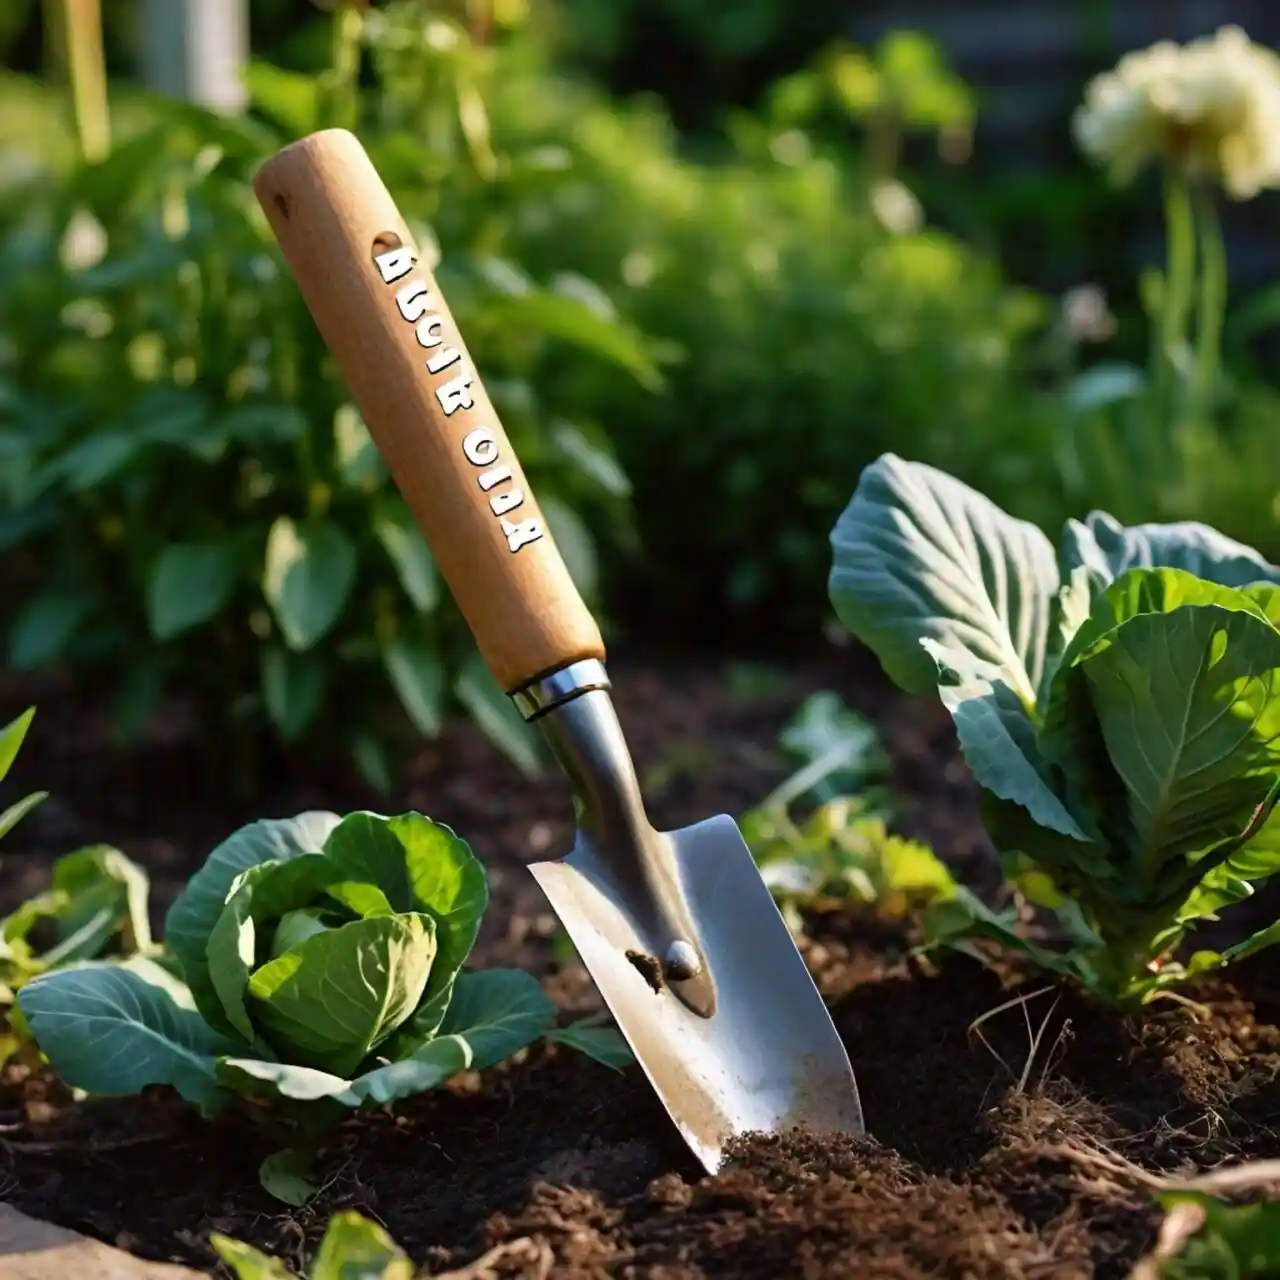 garden trowel next to a weed resembling cabbage